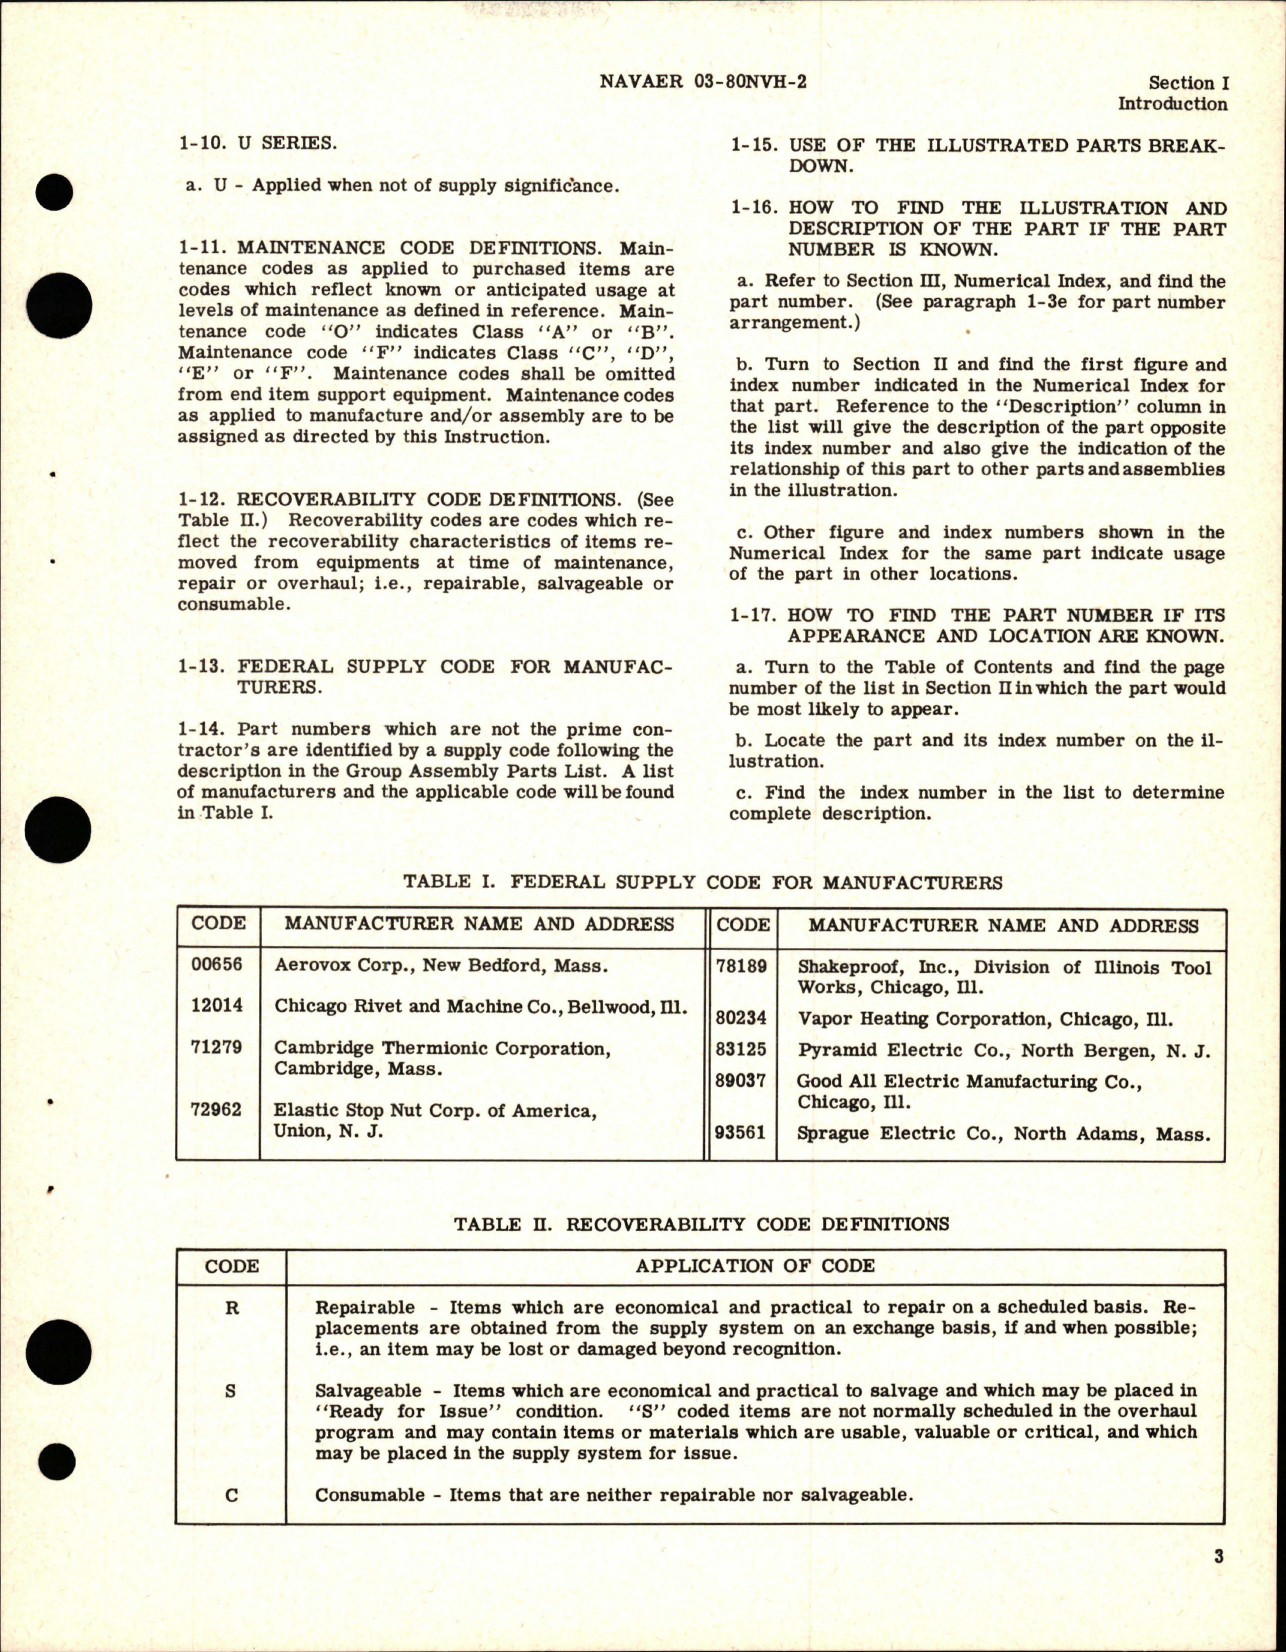 Sample page 5 from AirCorps Library document: Illustrated Parts Breakdown for Temperature Controller - Parts 25730028-01 and 25730028-02 